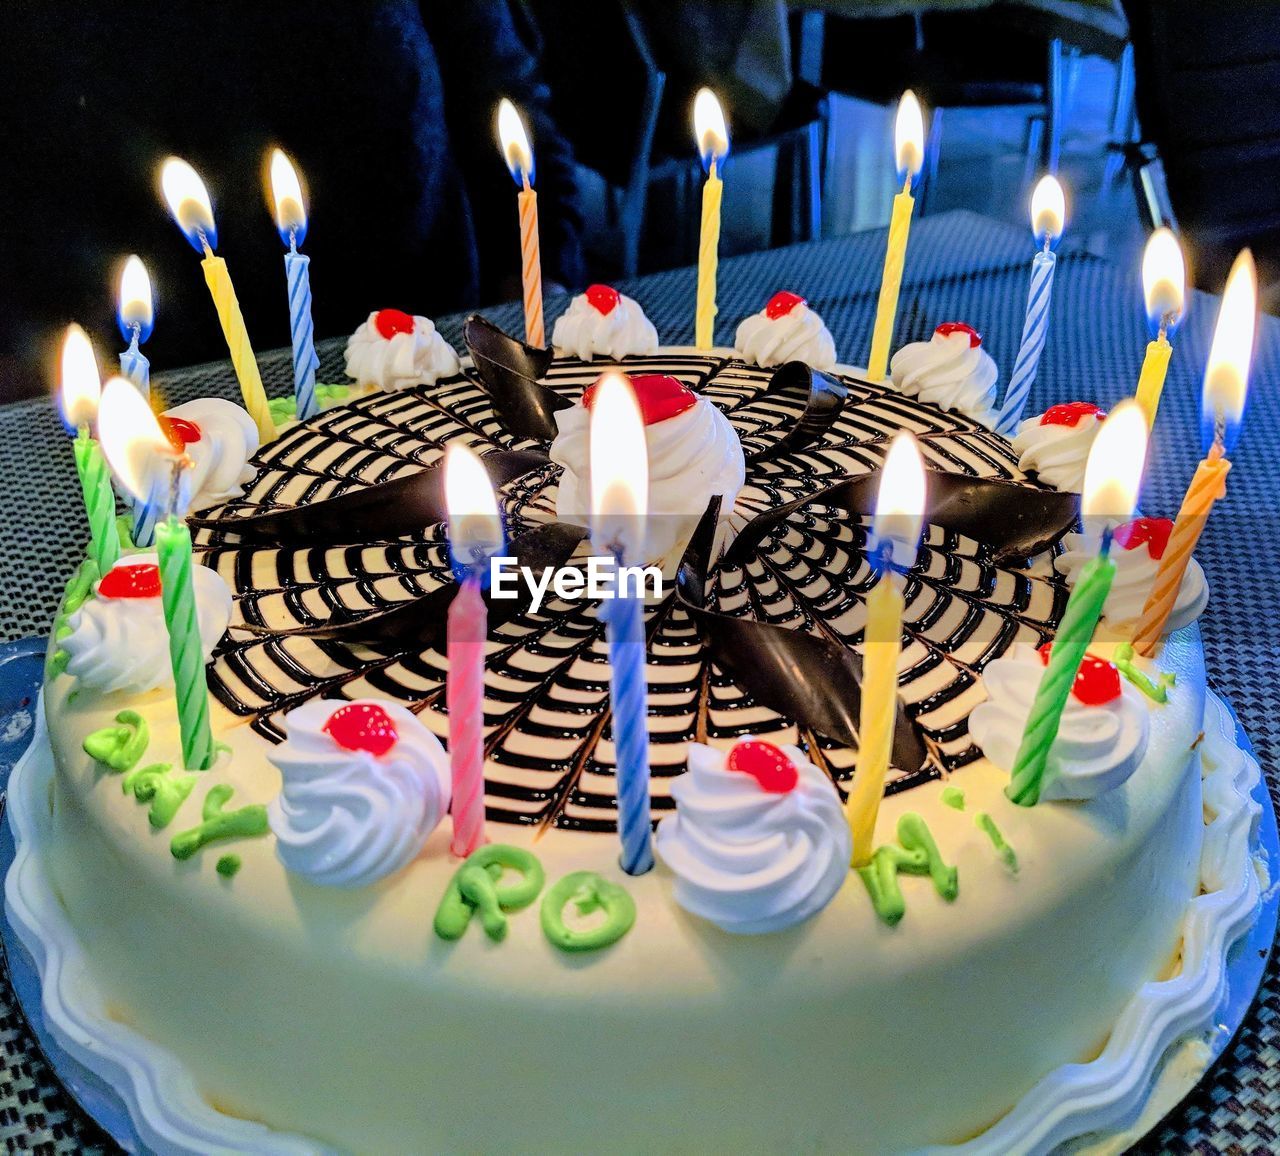 CLOSE-UP OF CAKE WITH CANDLES ON BIRTHDAY